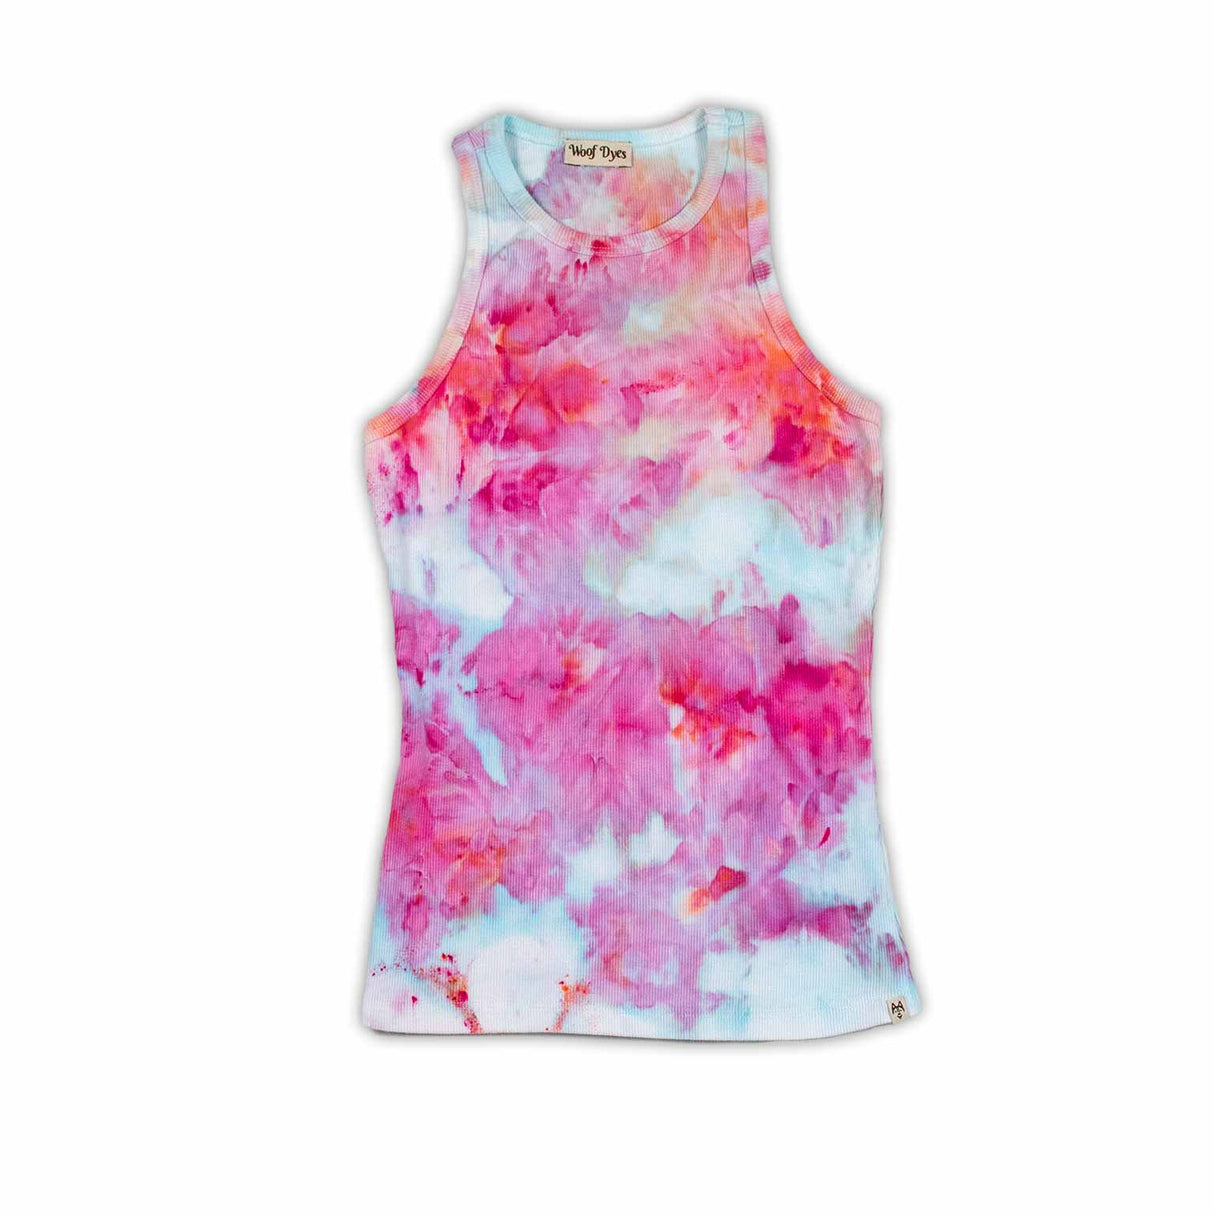 A casual yet chic high-neck women's tank top with an ice dye technique creating a soft fusion of pink and blue colors, similar to a pastel nebula.